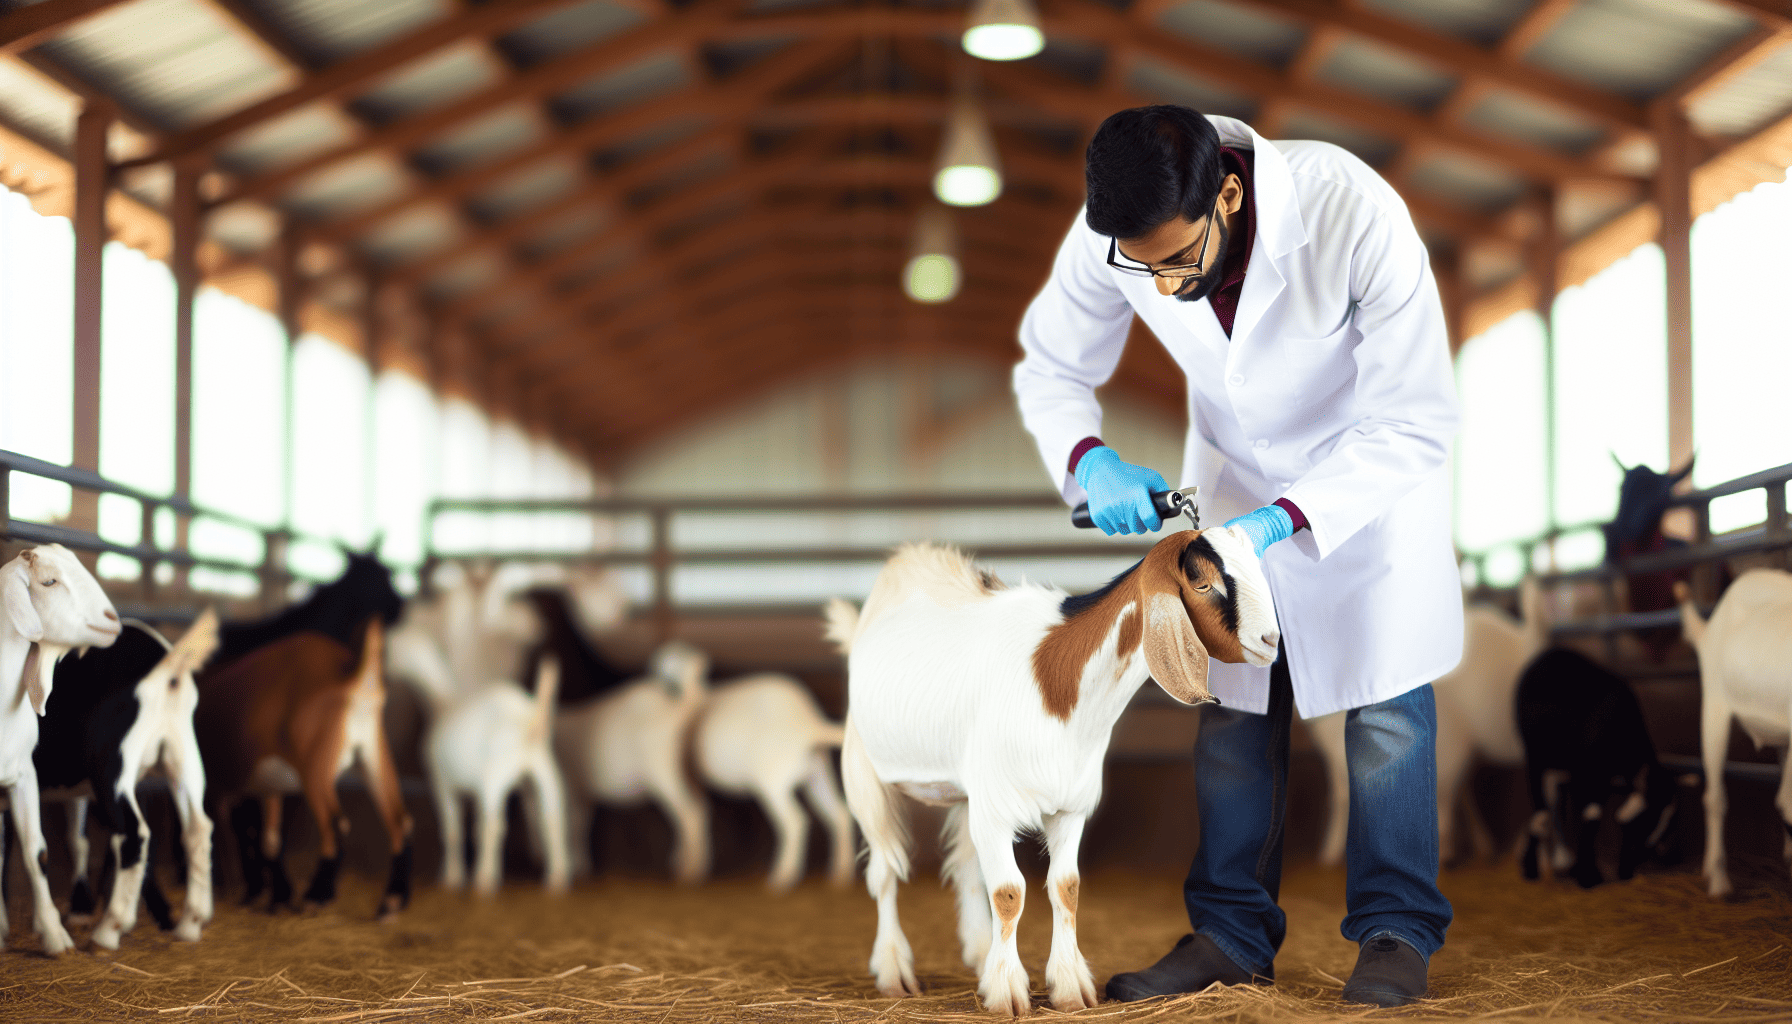 Goat receiving hoof trimming from a veterinarian